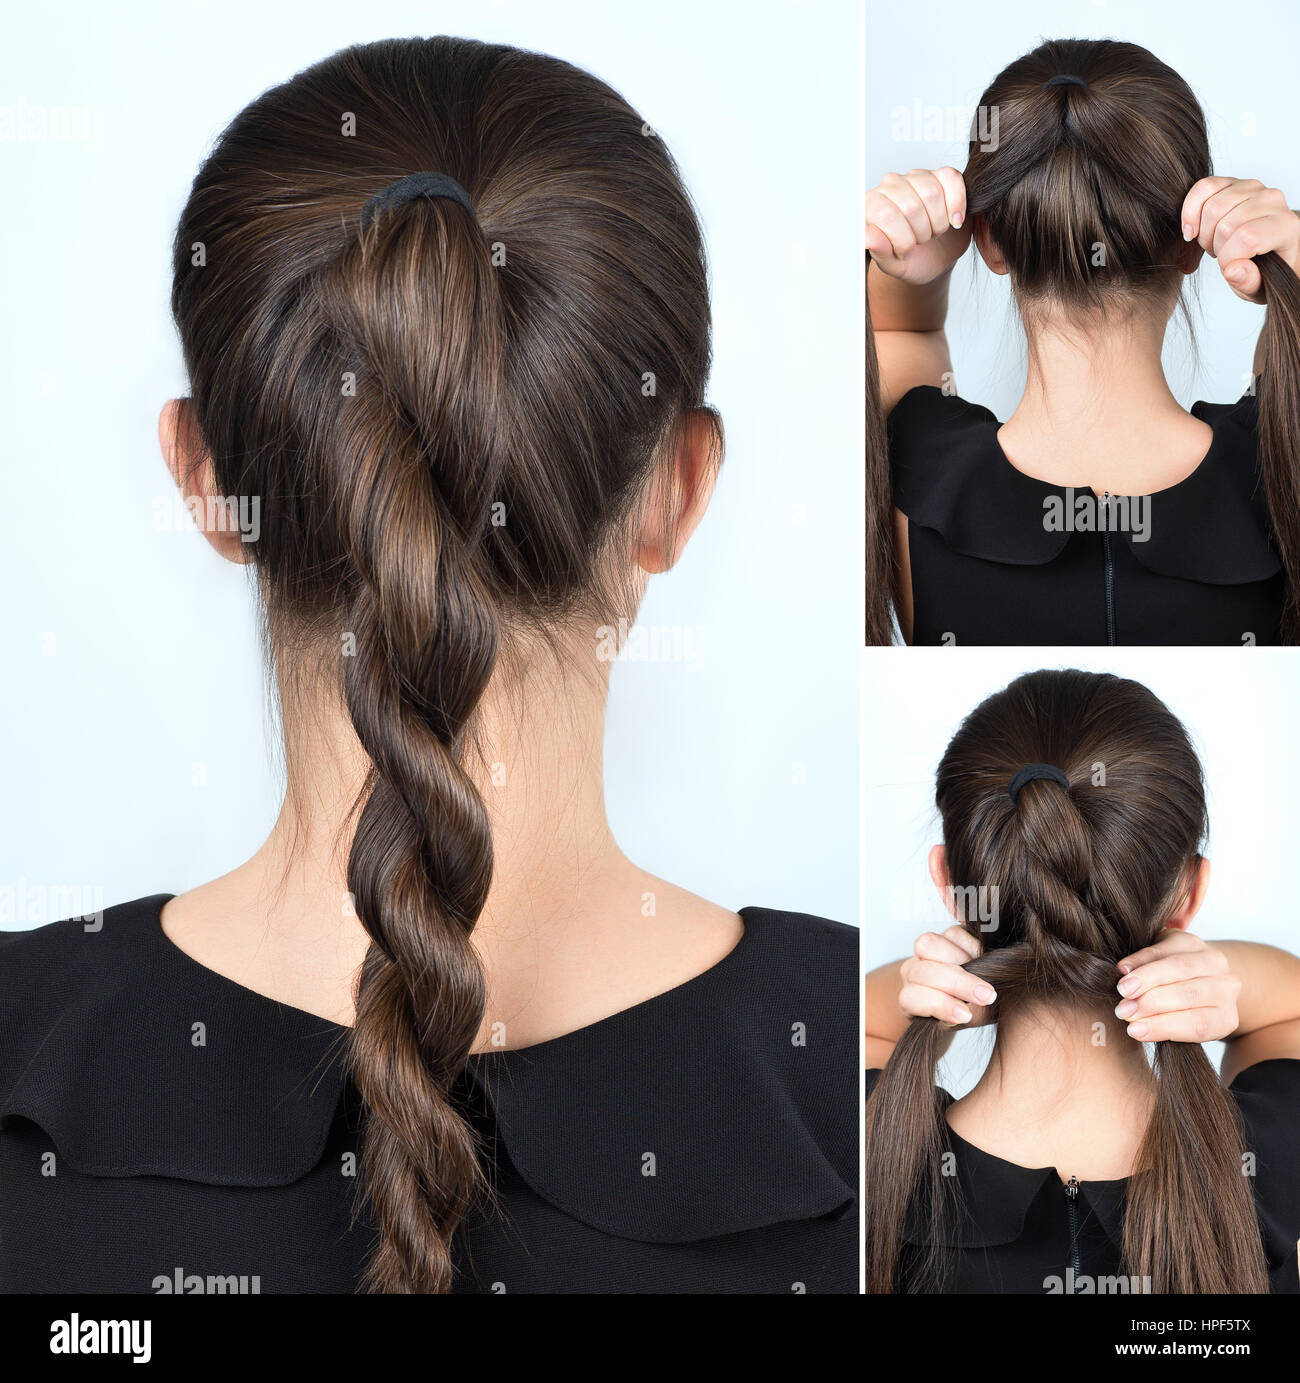 simple hairstyle twisted plait tutorial. Hairstyle for long hair Stock ...